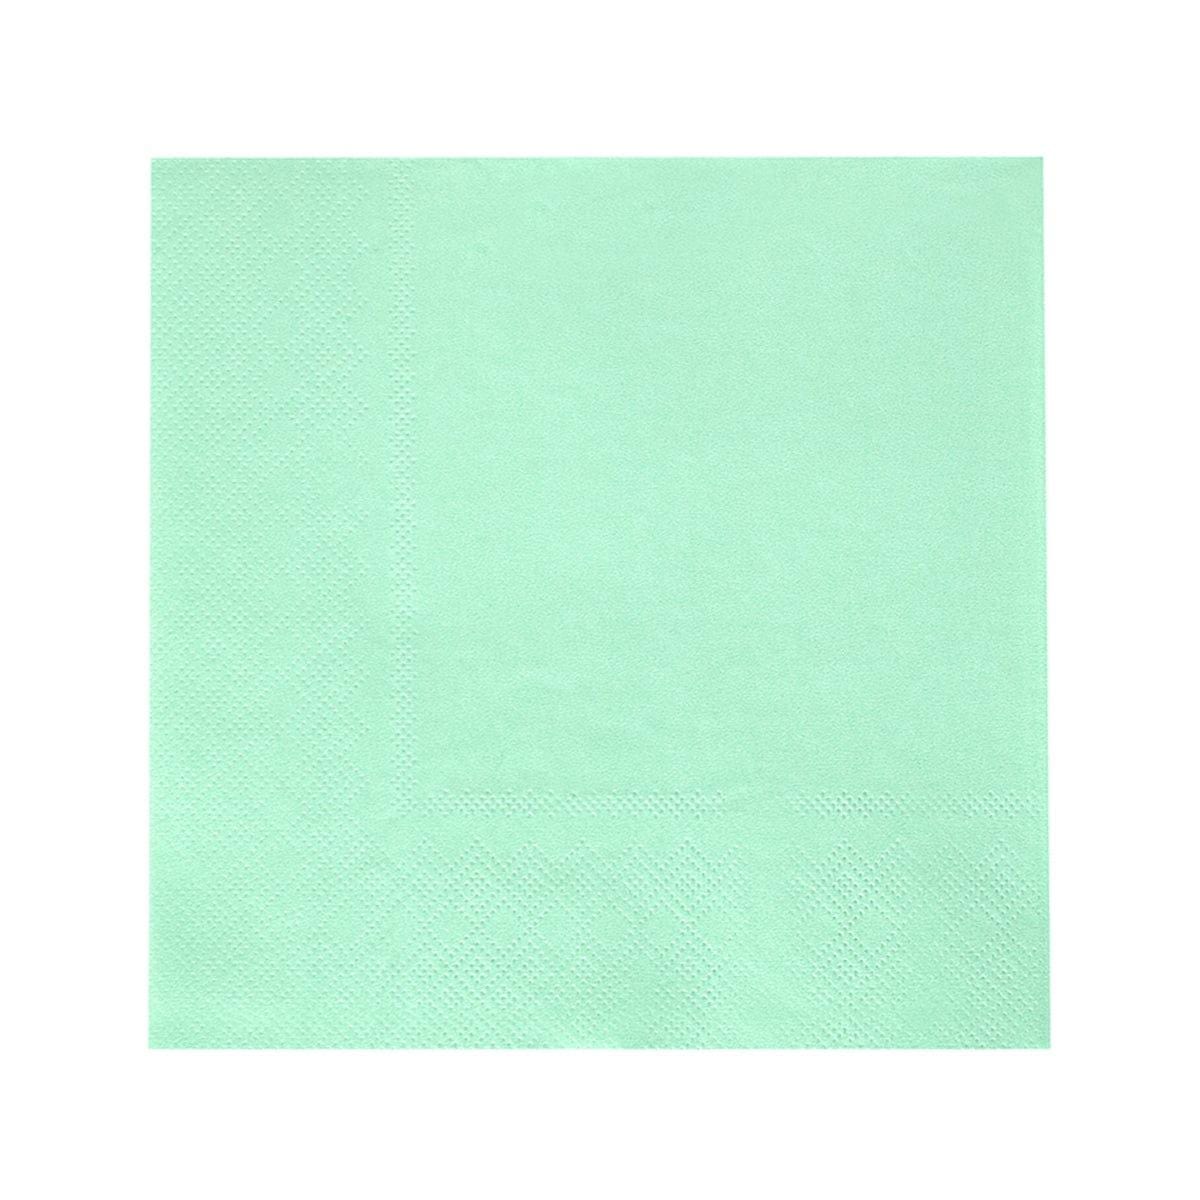 YIWU SANDY PAPER PRODUCTS CO., LTD Everyday Entertaining Mint Green Lunch Napkins, 16 Count